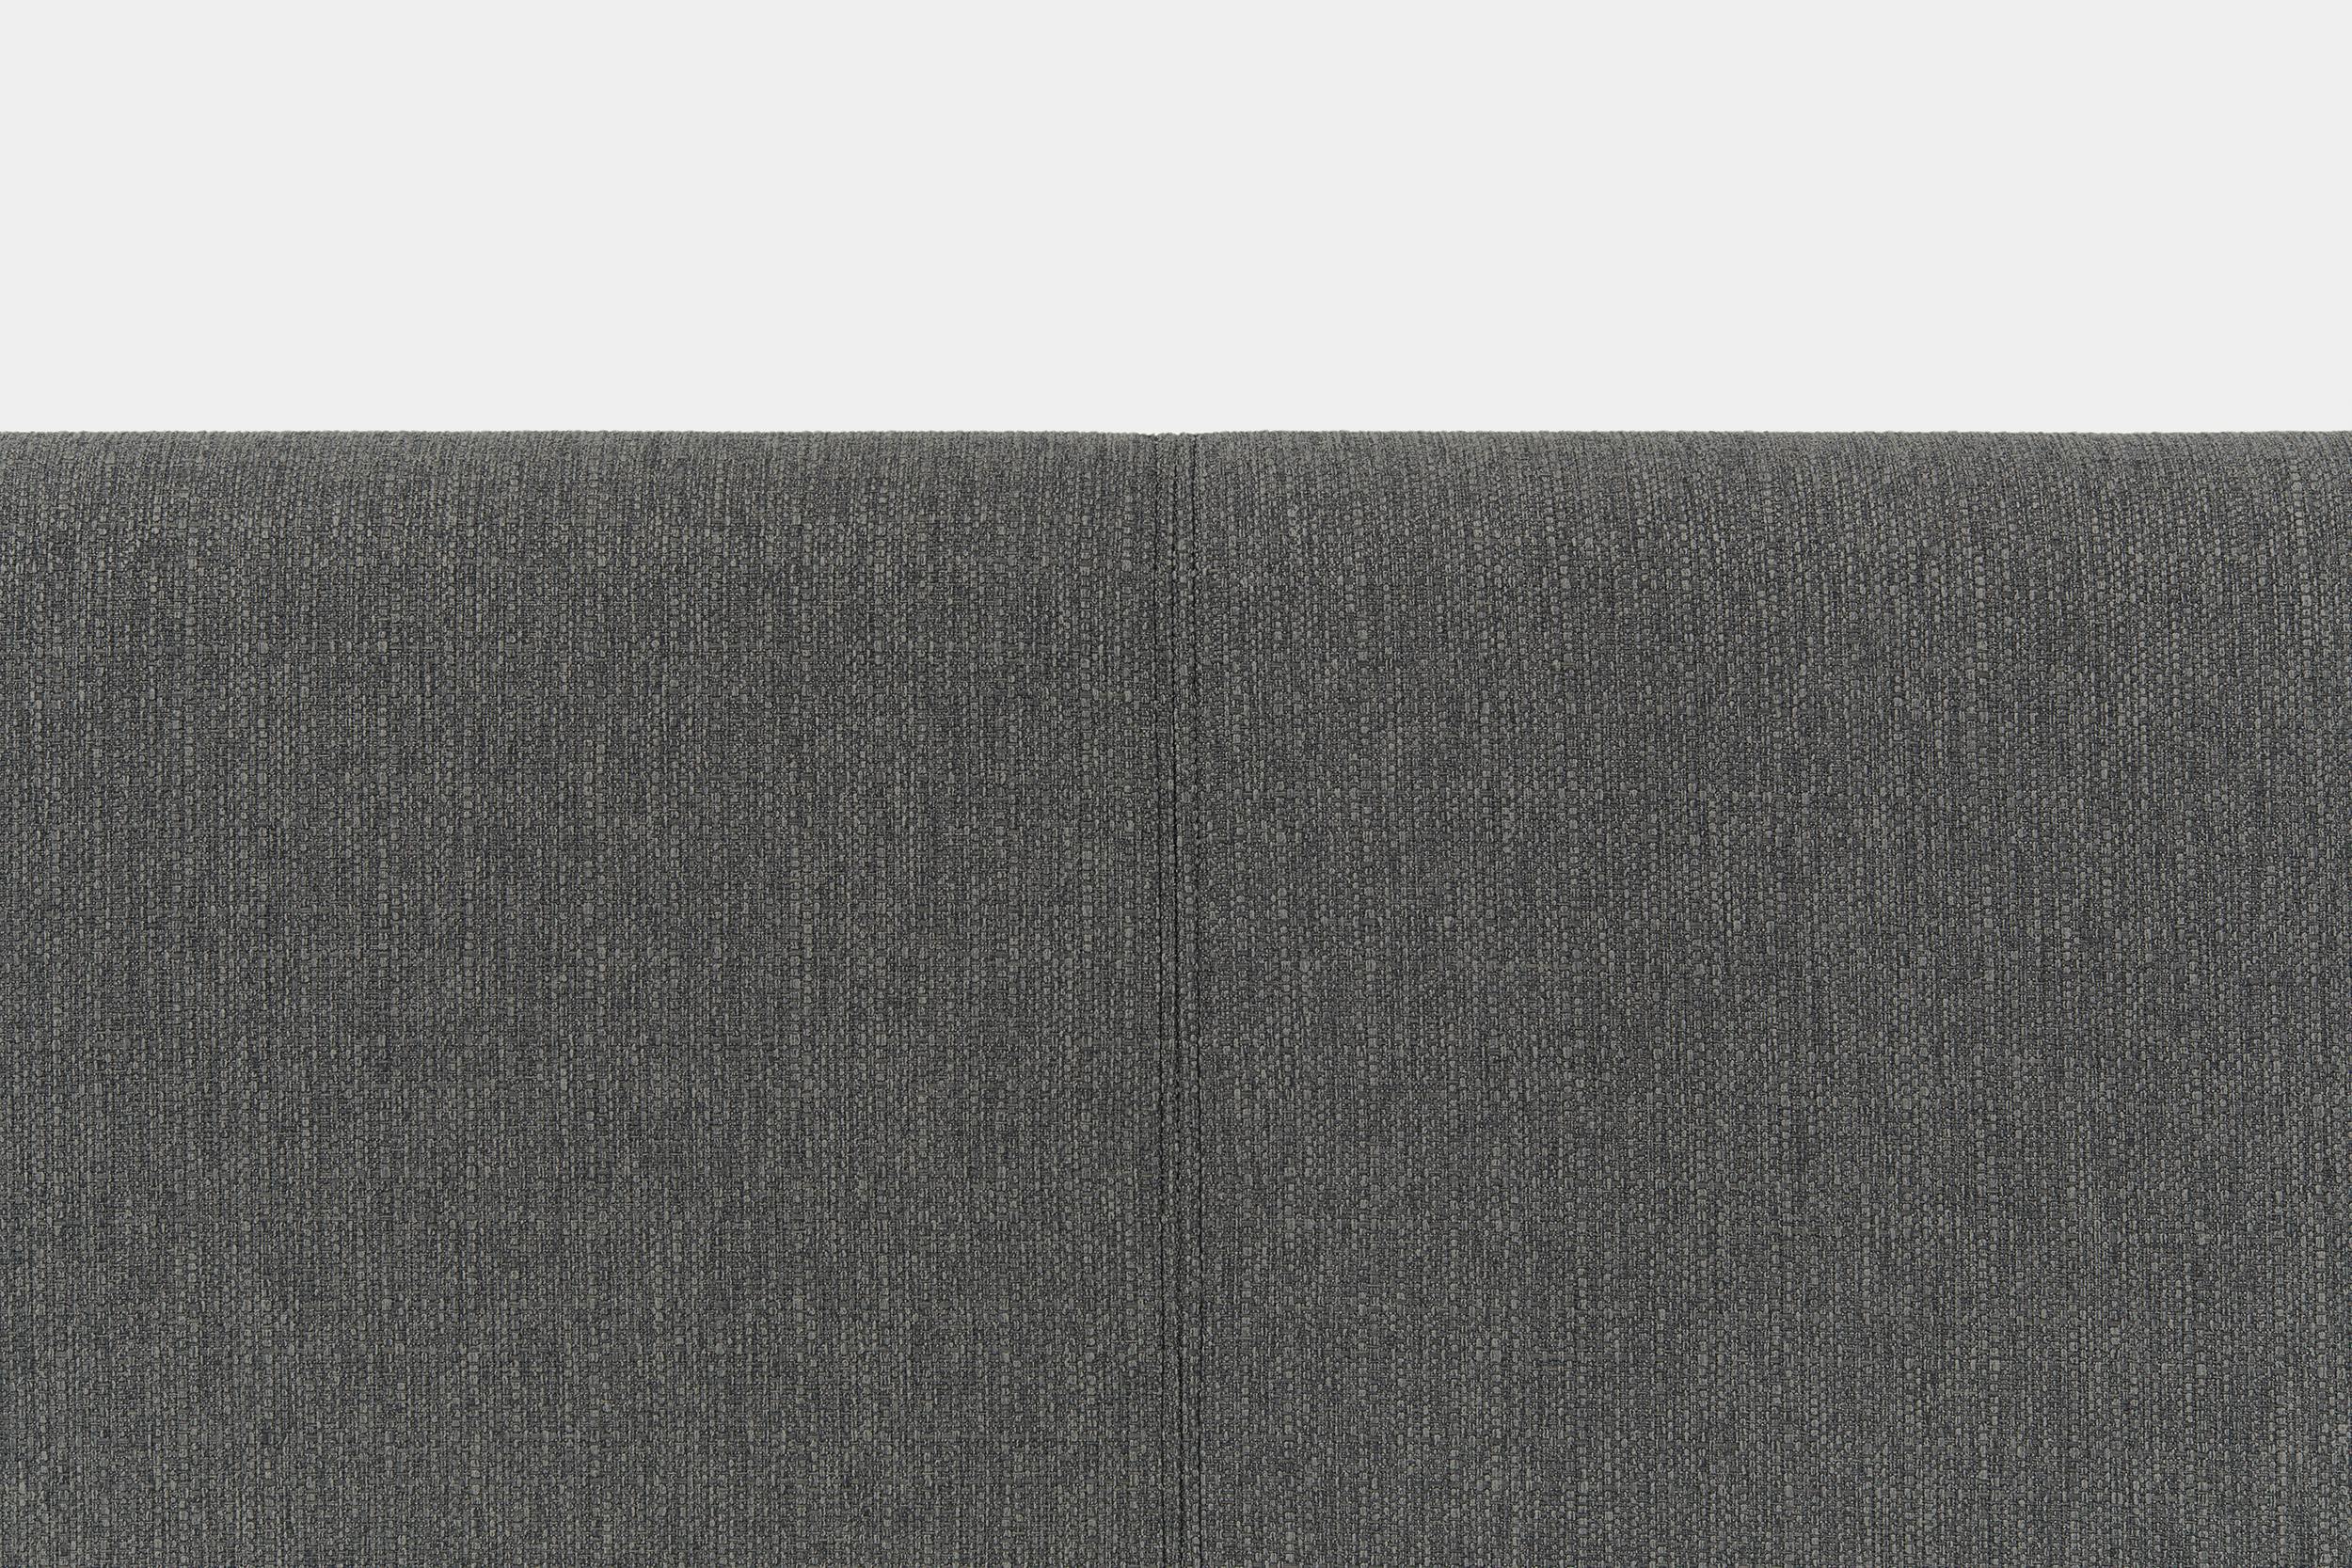 The PillowBoard Cover (Dark Charcoal) - Render - Seam